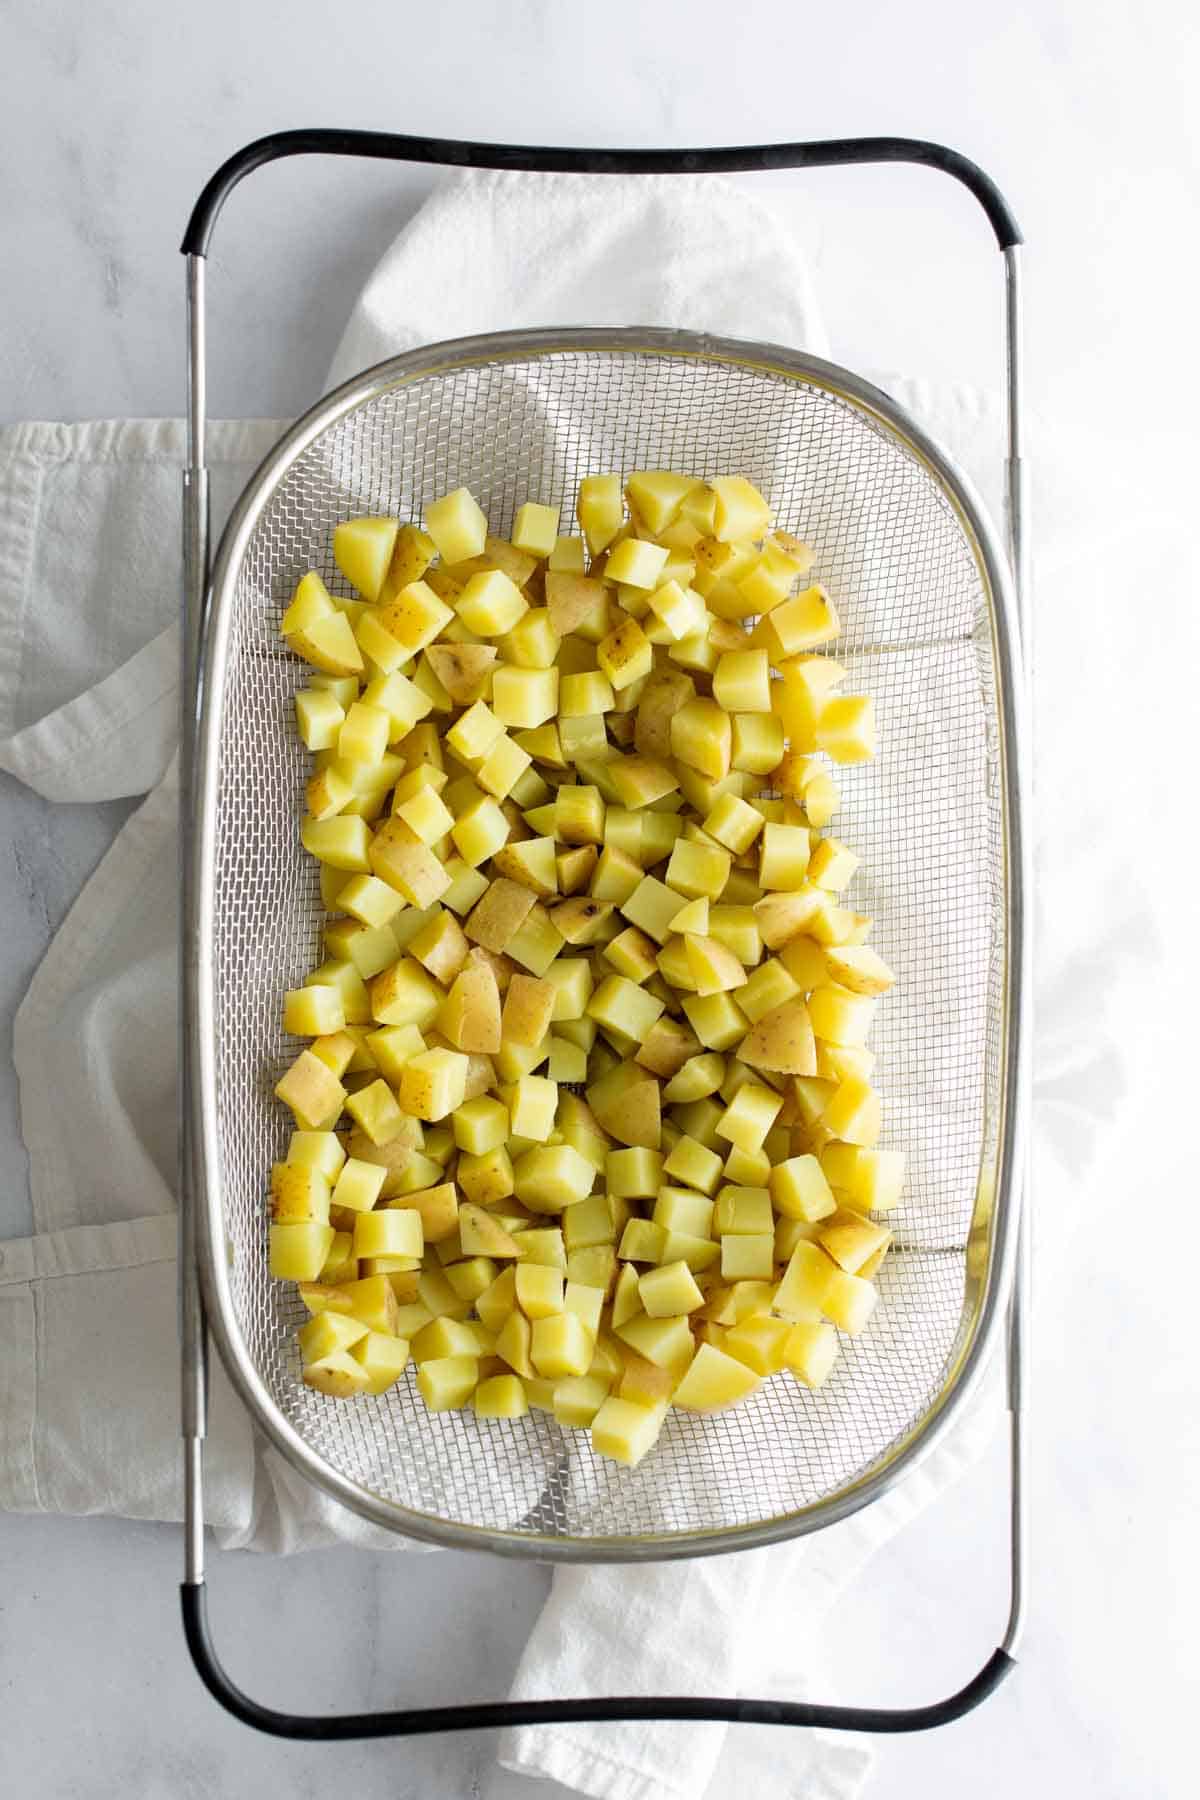 Diced potatoes drying on a mesh strainer over a white countertop.